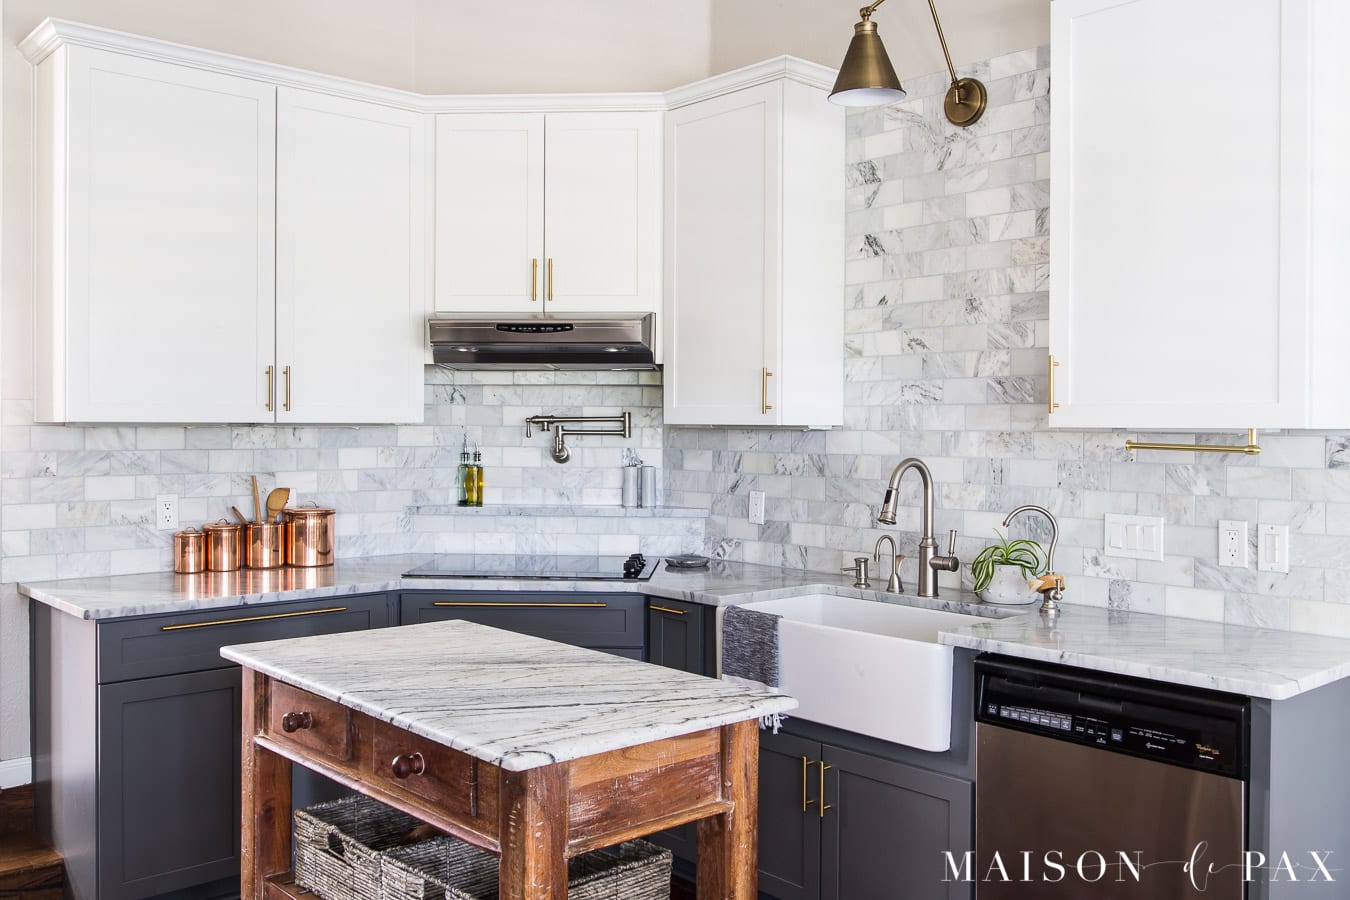 marble kitchen with gray and white cabinets and wood island | Maison de Pax